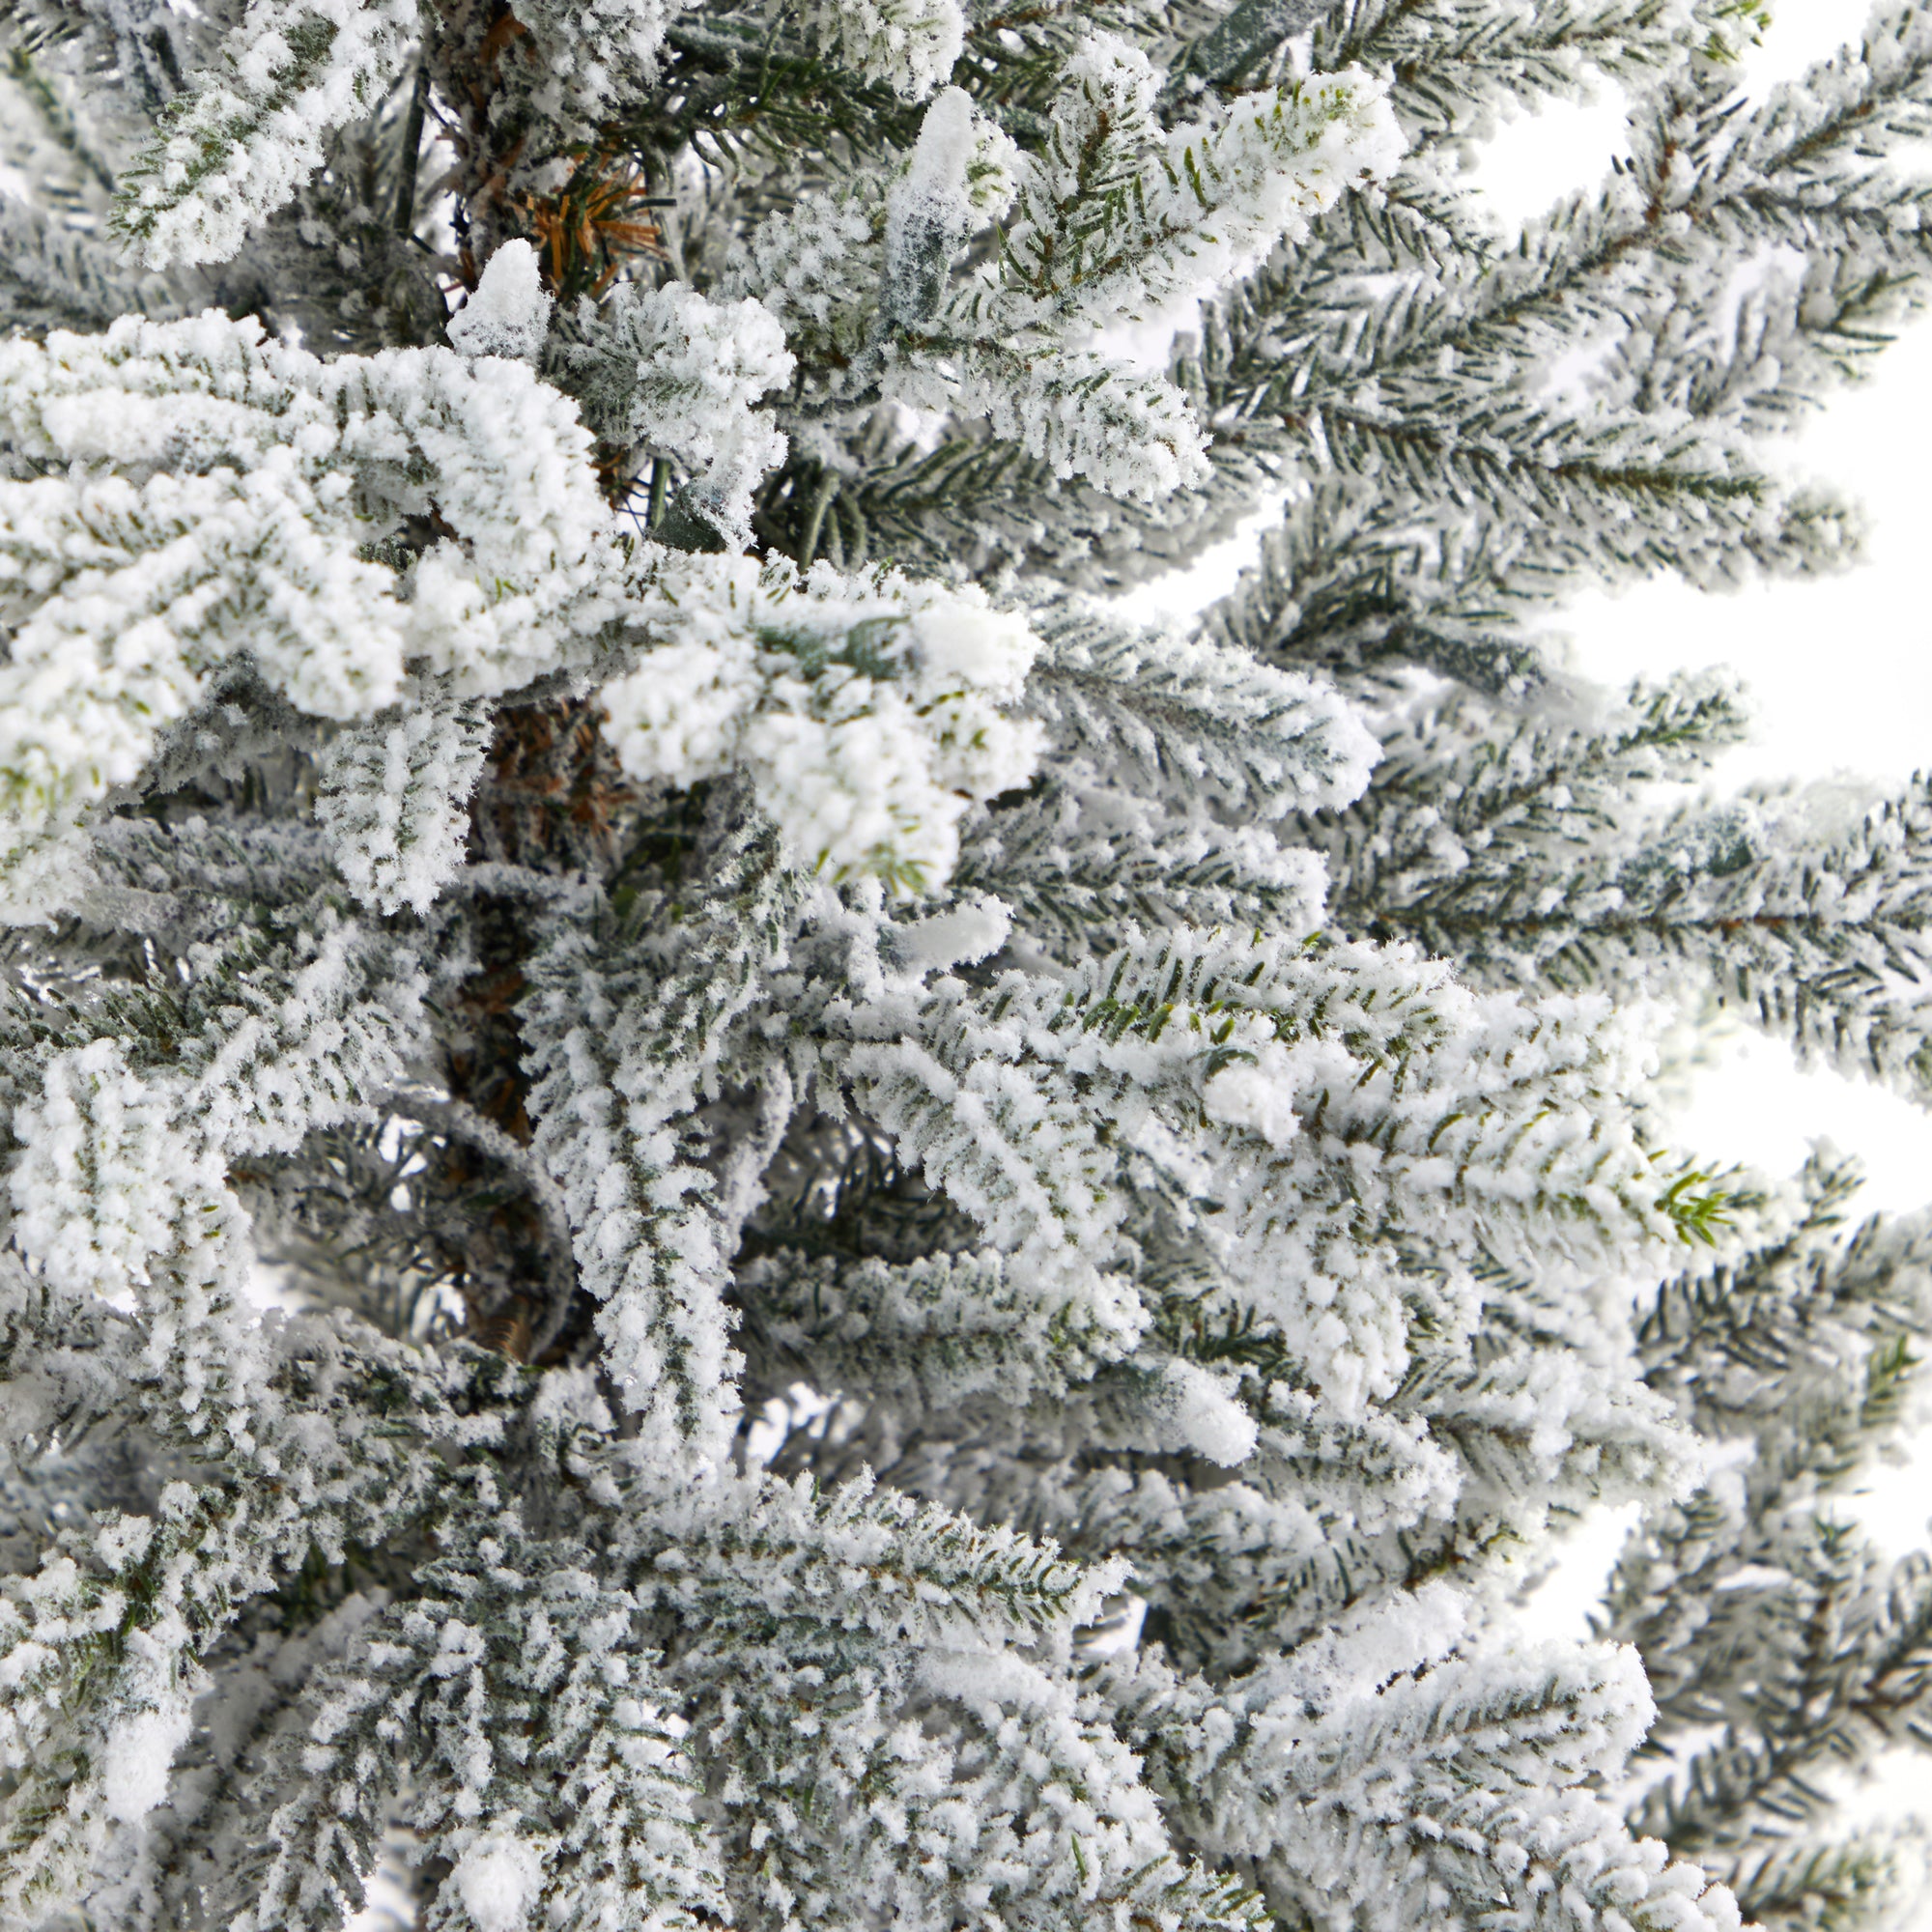 5' Flocked Fraser Fir Artificial Christmas Tree with 300 Warm White Lights and 967 Bendable Branches in Gray Planter